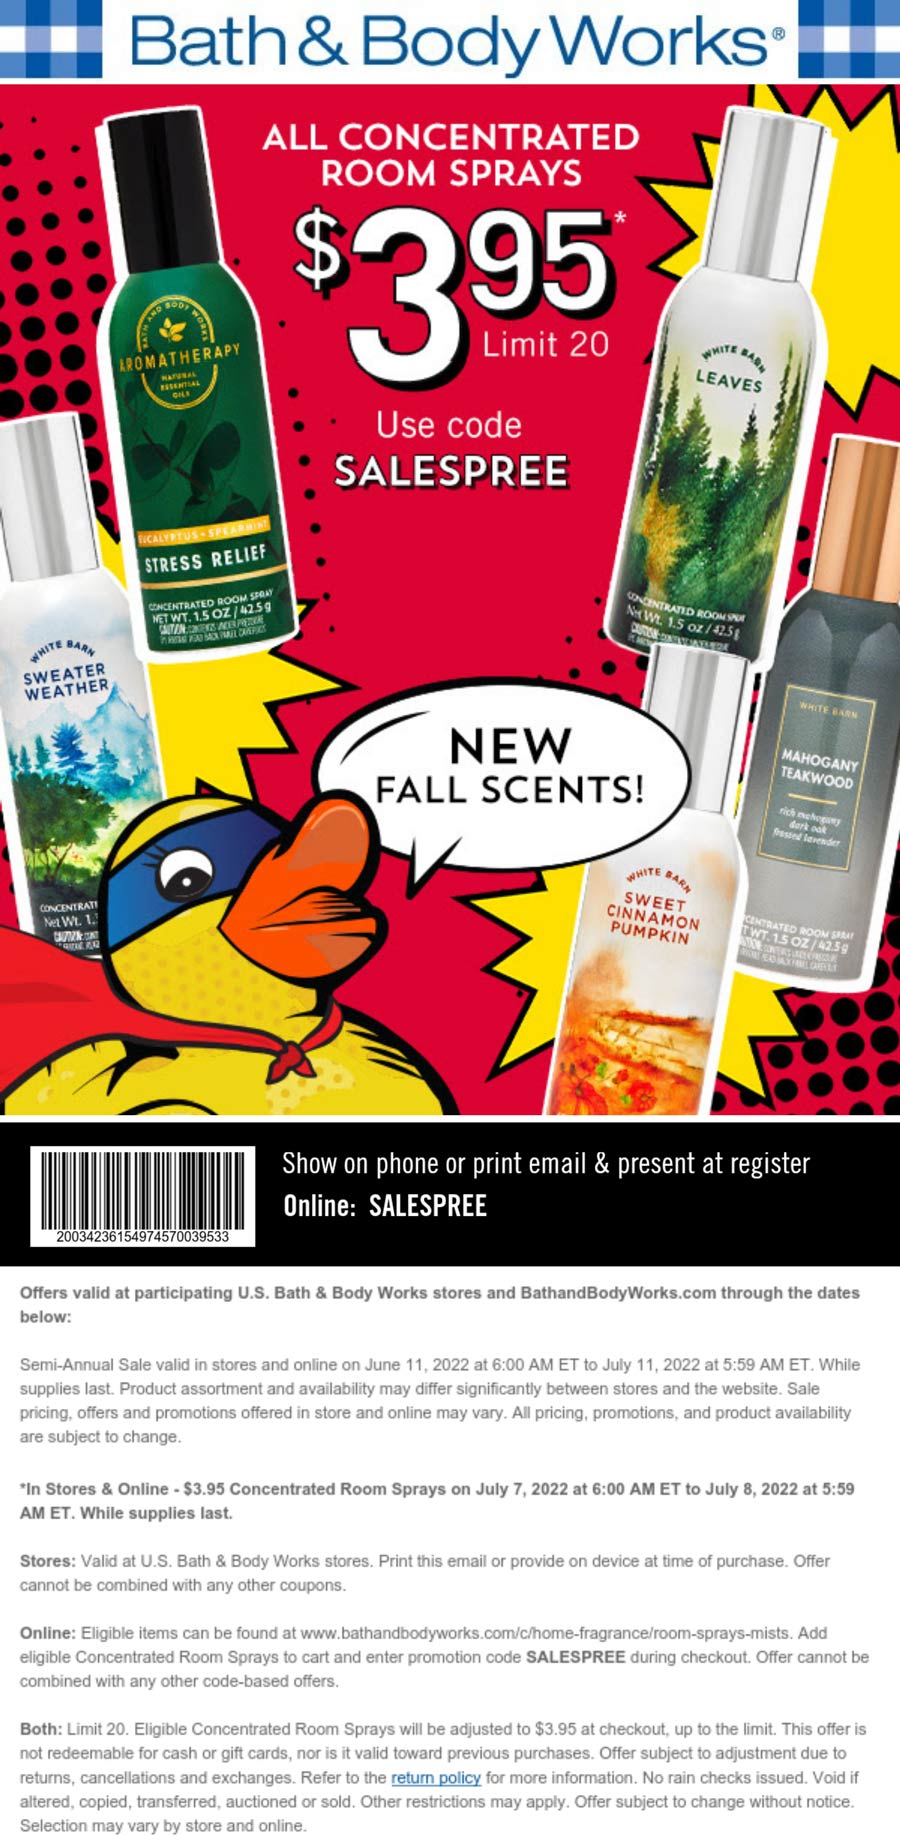 Bath & Body Works stores Coupon  $4 concentrated room sprays today at Bath & Body Works, or online via promo code SALESPREE #bathbodyworks 